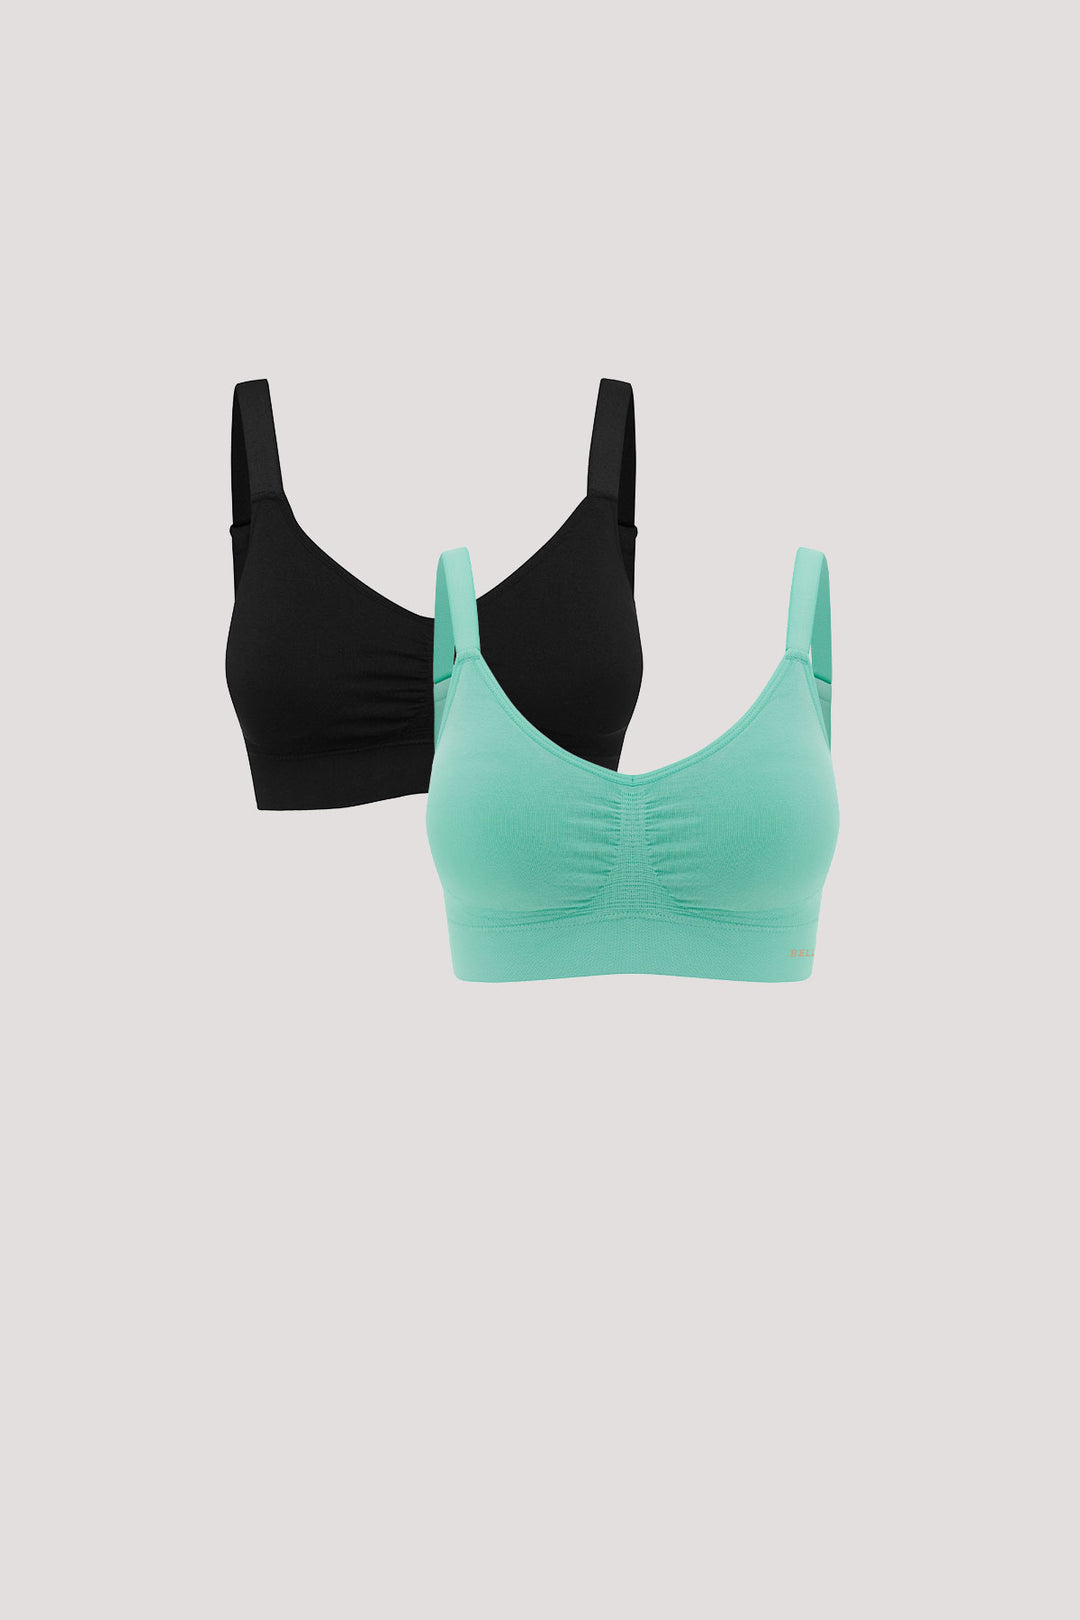 Women's everyday adjustable crop bra I Two Pack I Bella Bodies I Turquoise and Black